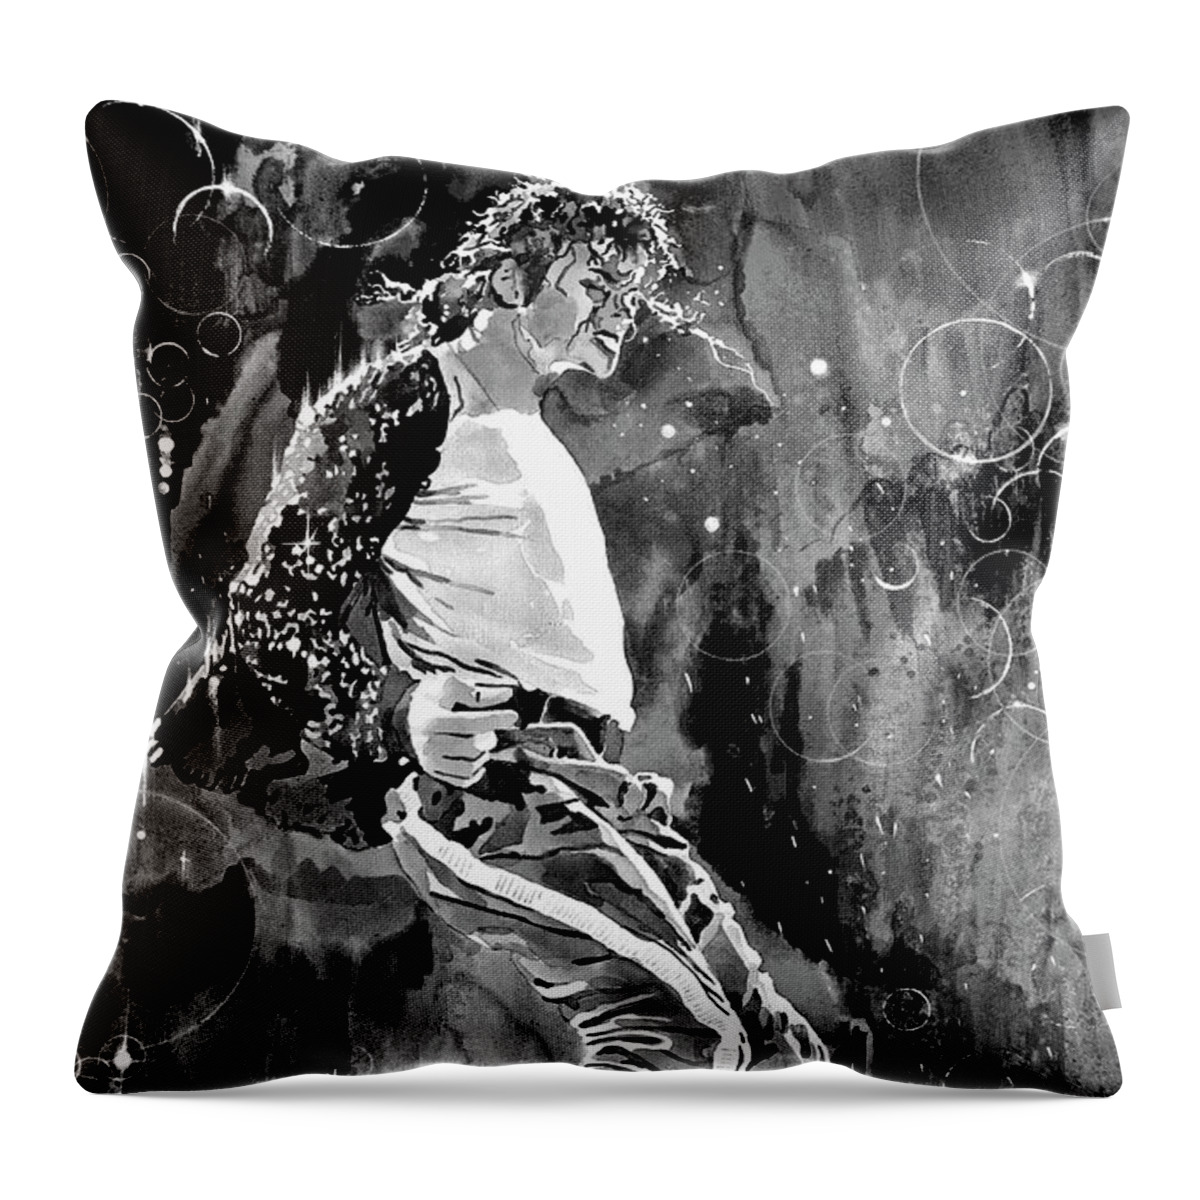 Michael Jackson Throw Pillow featuring the painting Michael Jackson Step by David Lloyd Glover